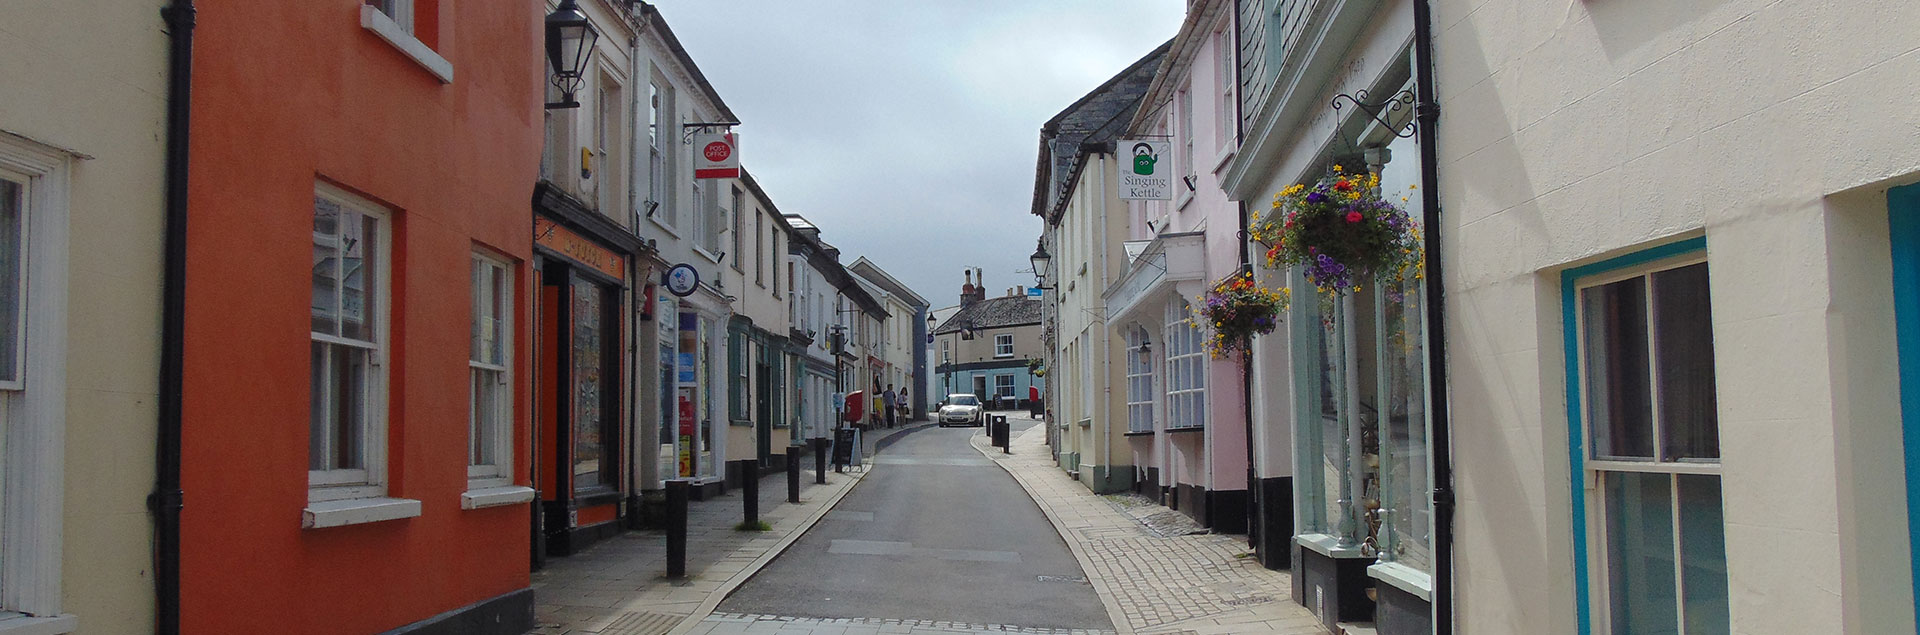 Things to do in Buckfastleigh